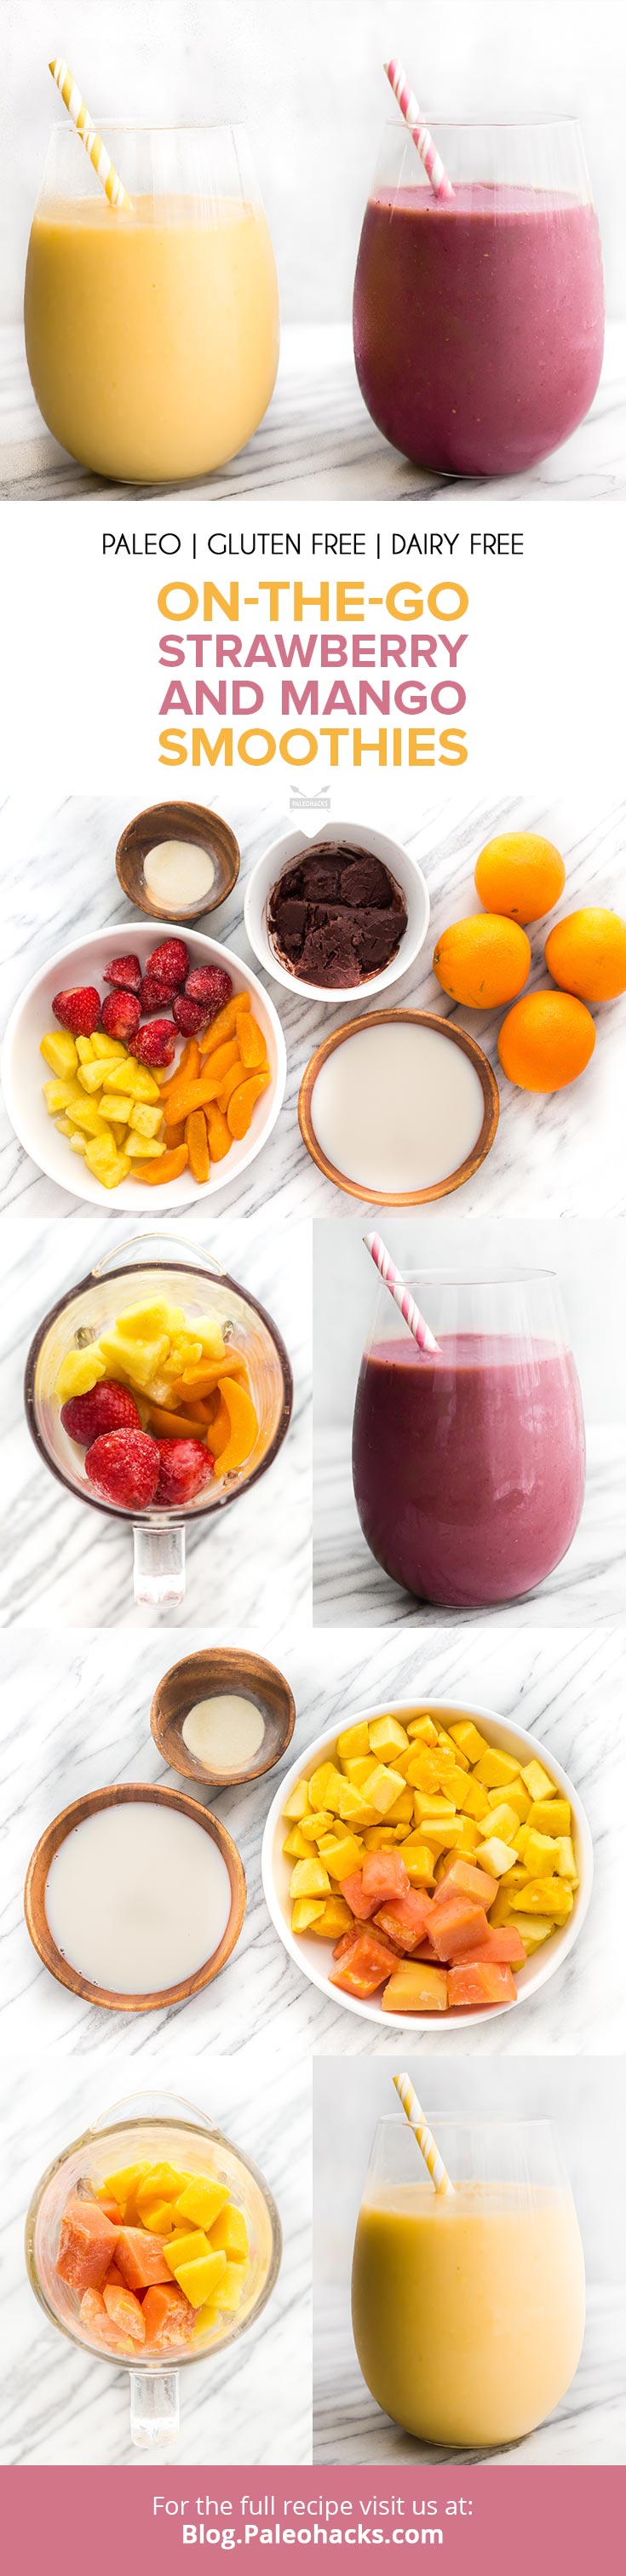 If you’re not much of a sit-and-eat-breakfast kind of person, these 3-step smoothies are the perfect way to energize your day.